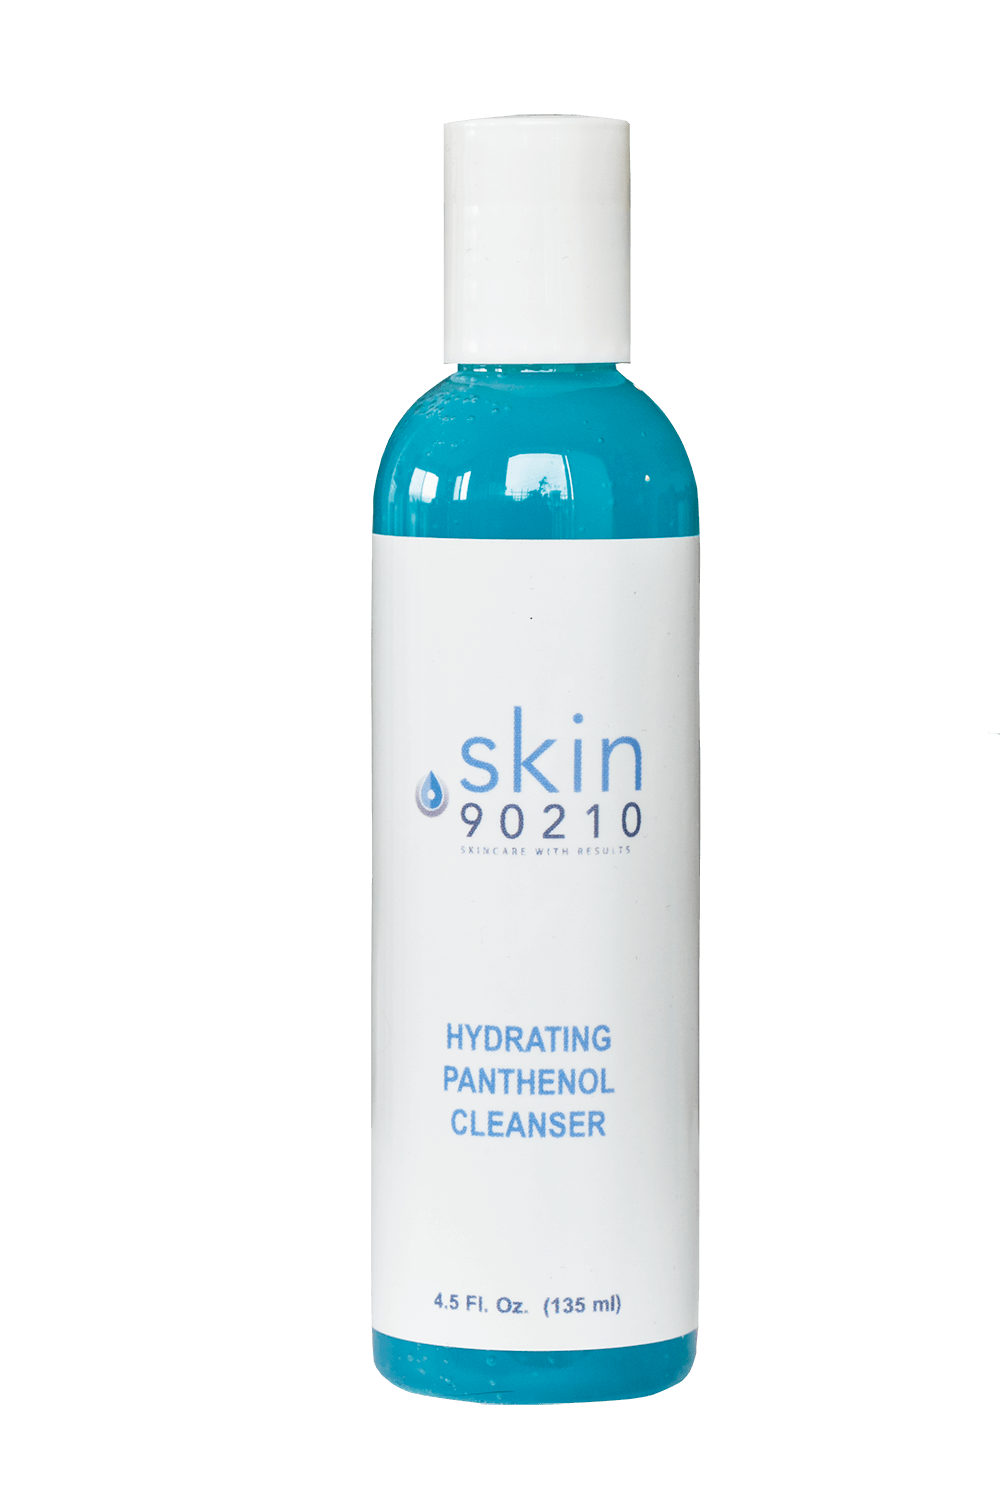 Skin 90210 Hydrating Panthenol Cleanser for Normal